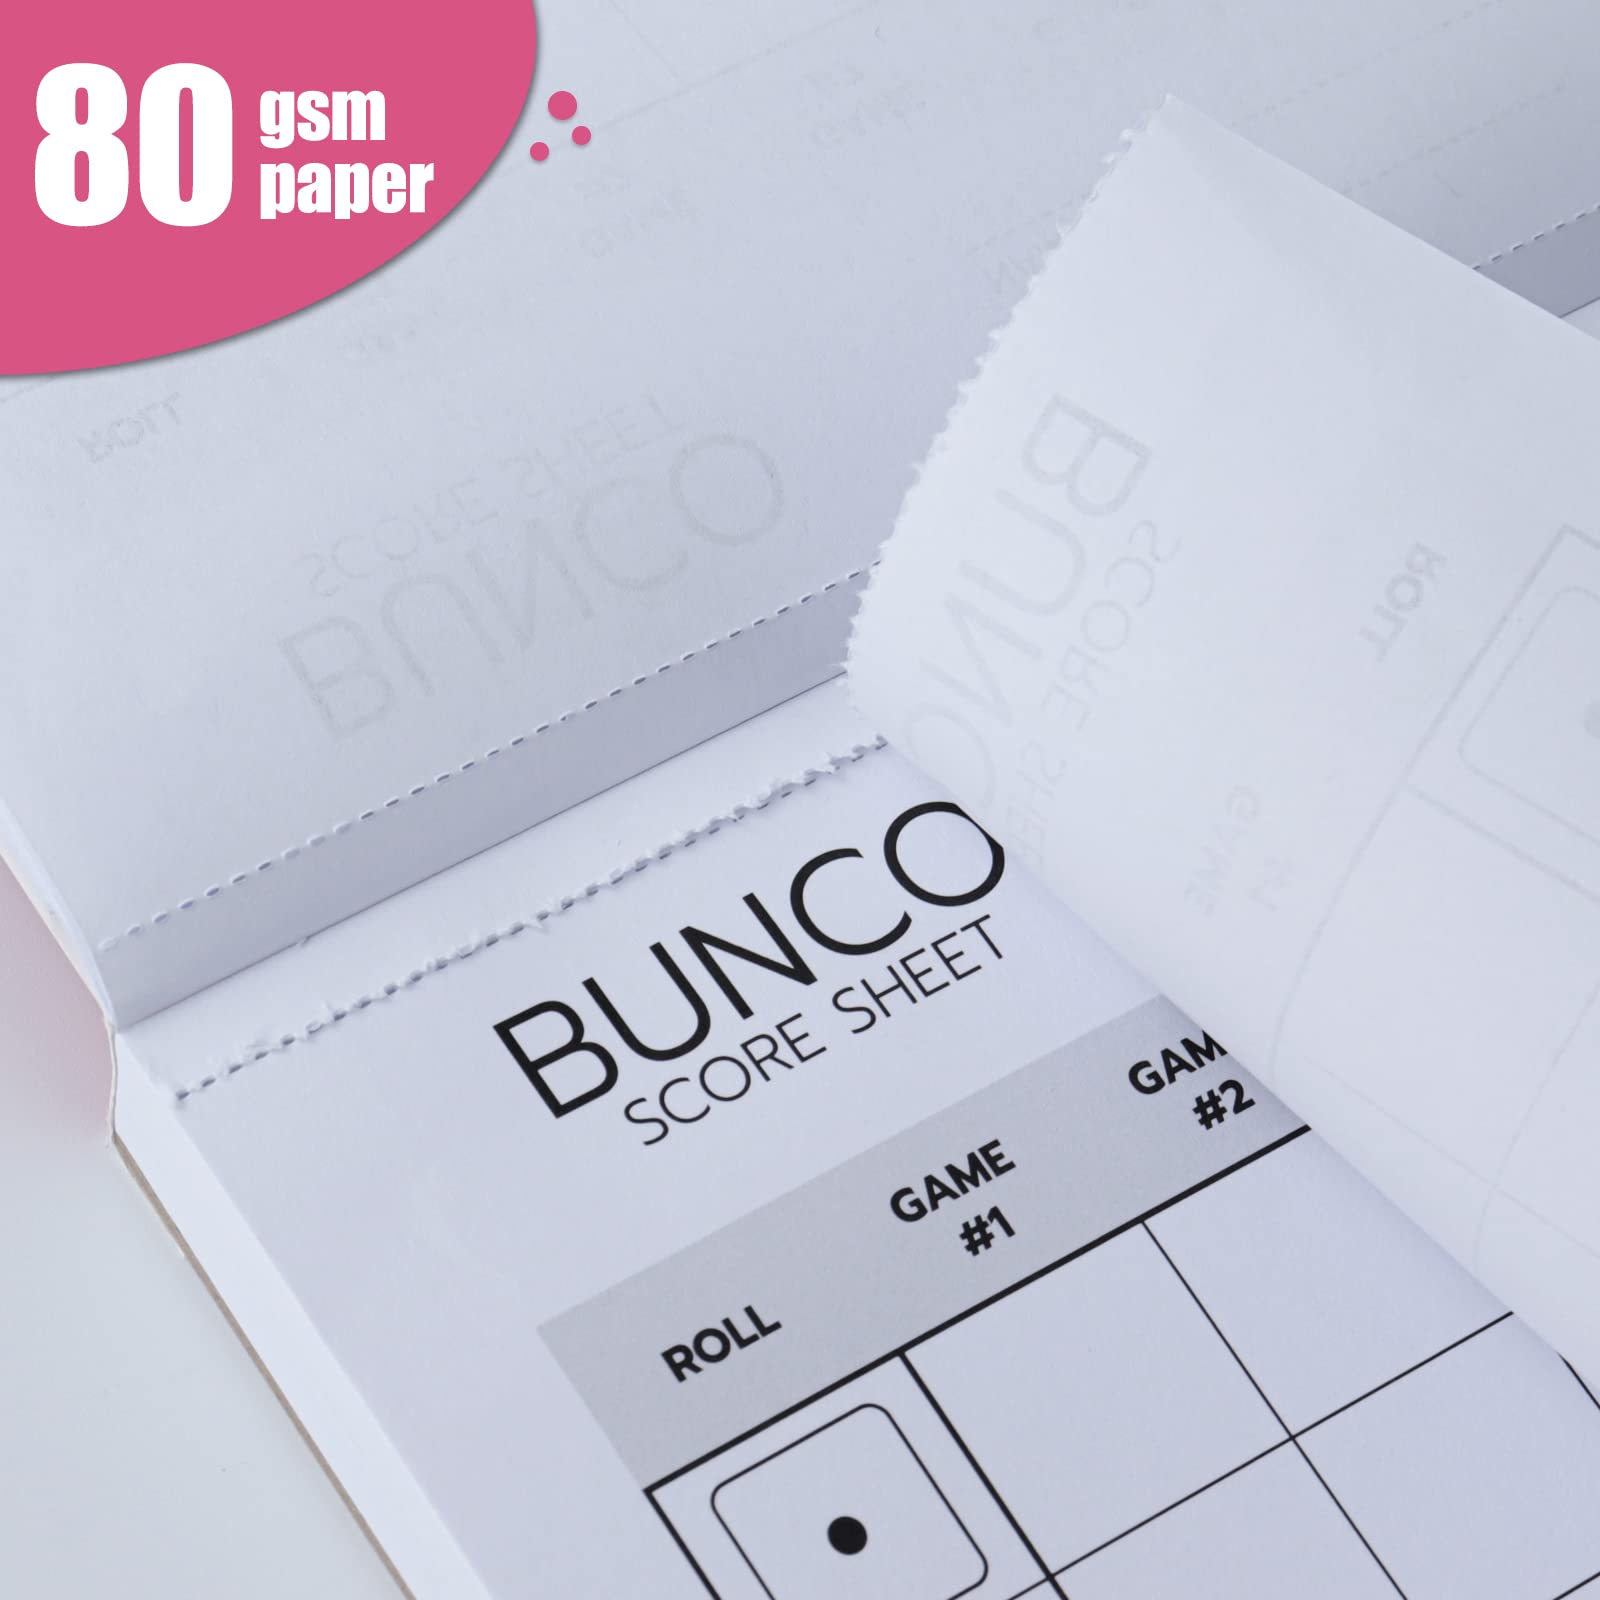 PlayDice Bunco Score Sheets, 100 Single Side Large Print Bunco Score Sheets with Perforation, Perfect Addition to Your Bunco Game Kit